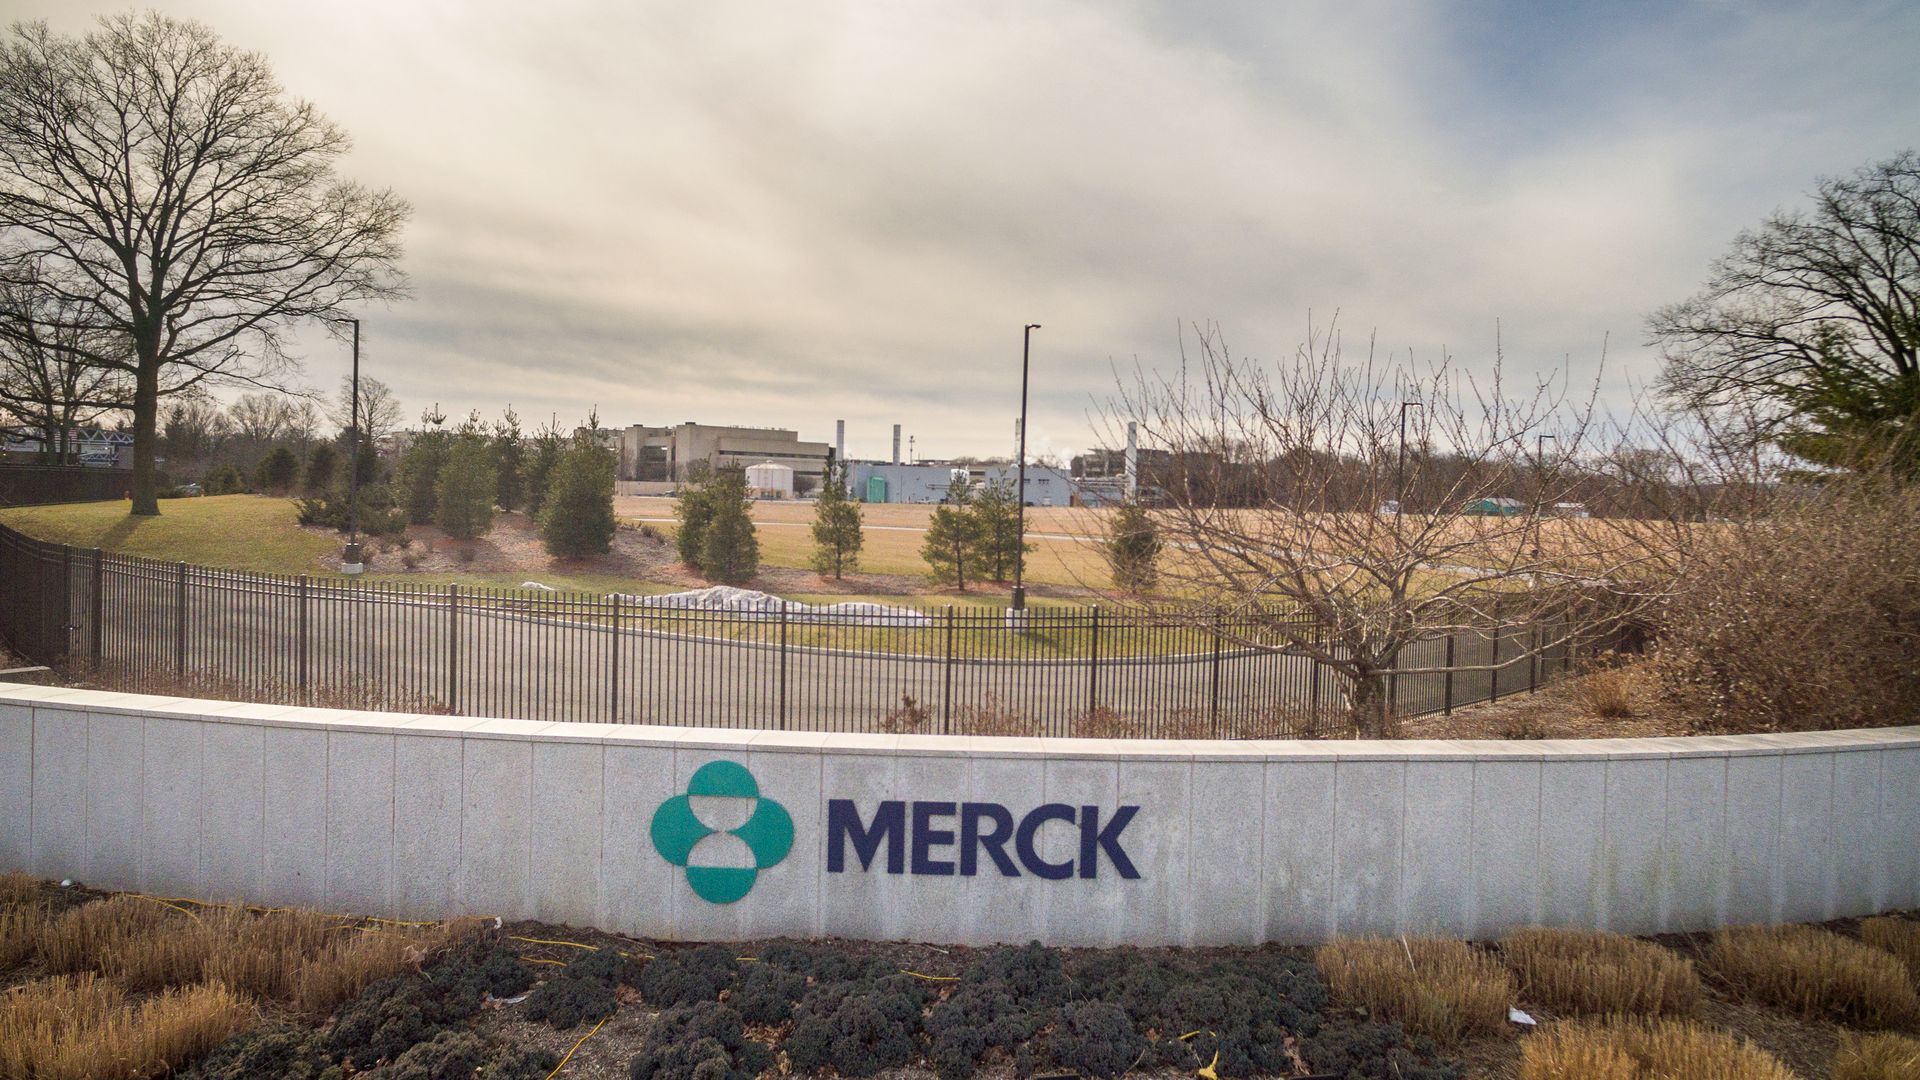 Merck's logo outside of its headquarters in Kenilworth, New Jersey.